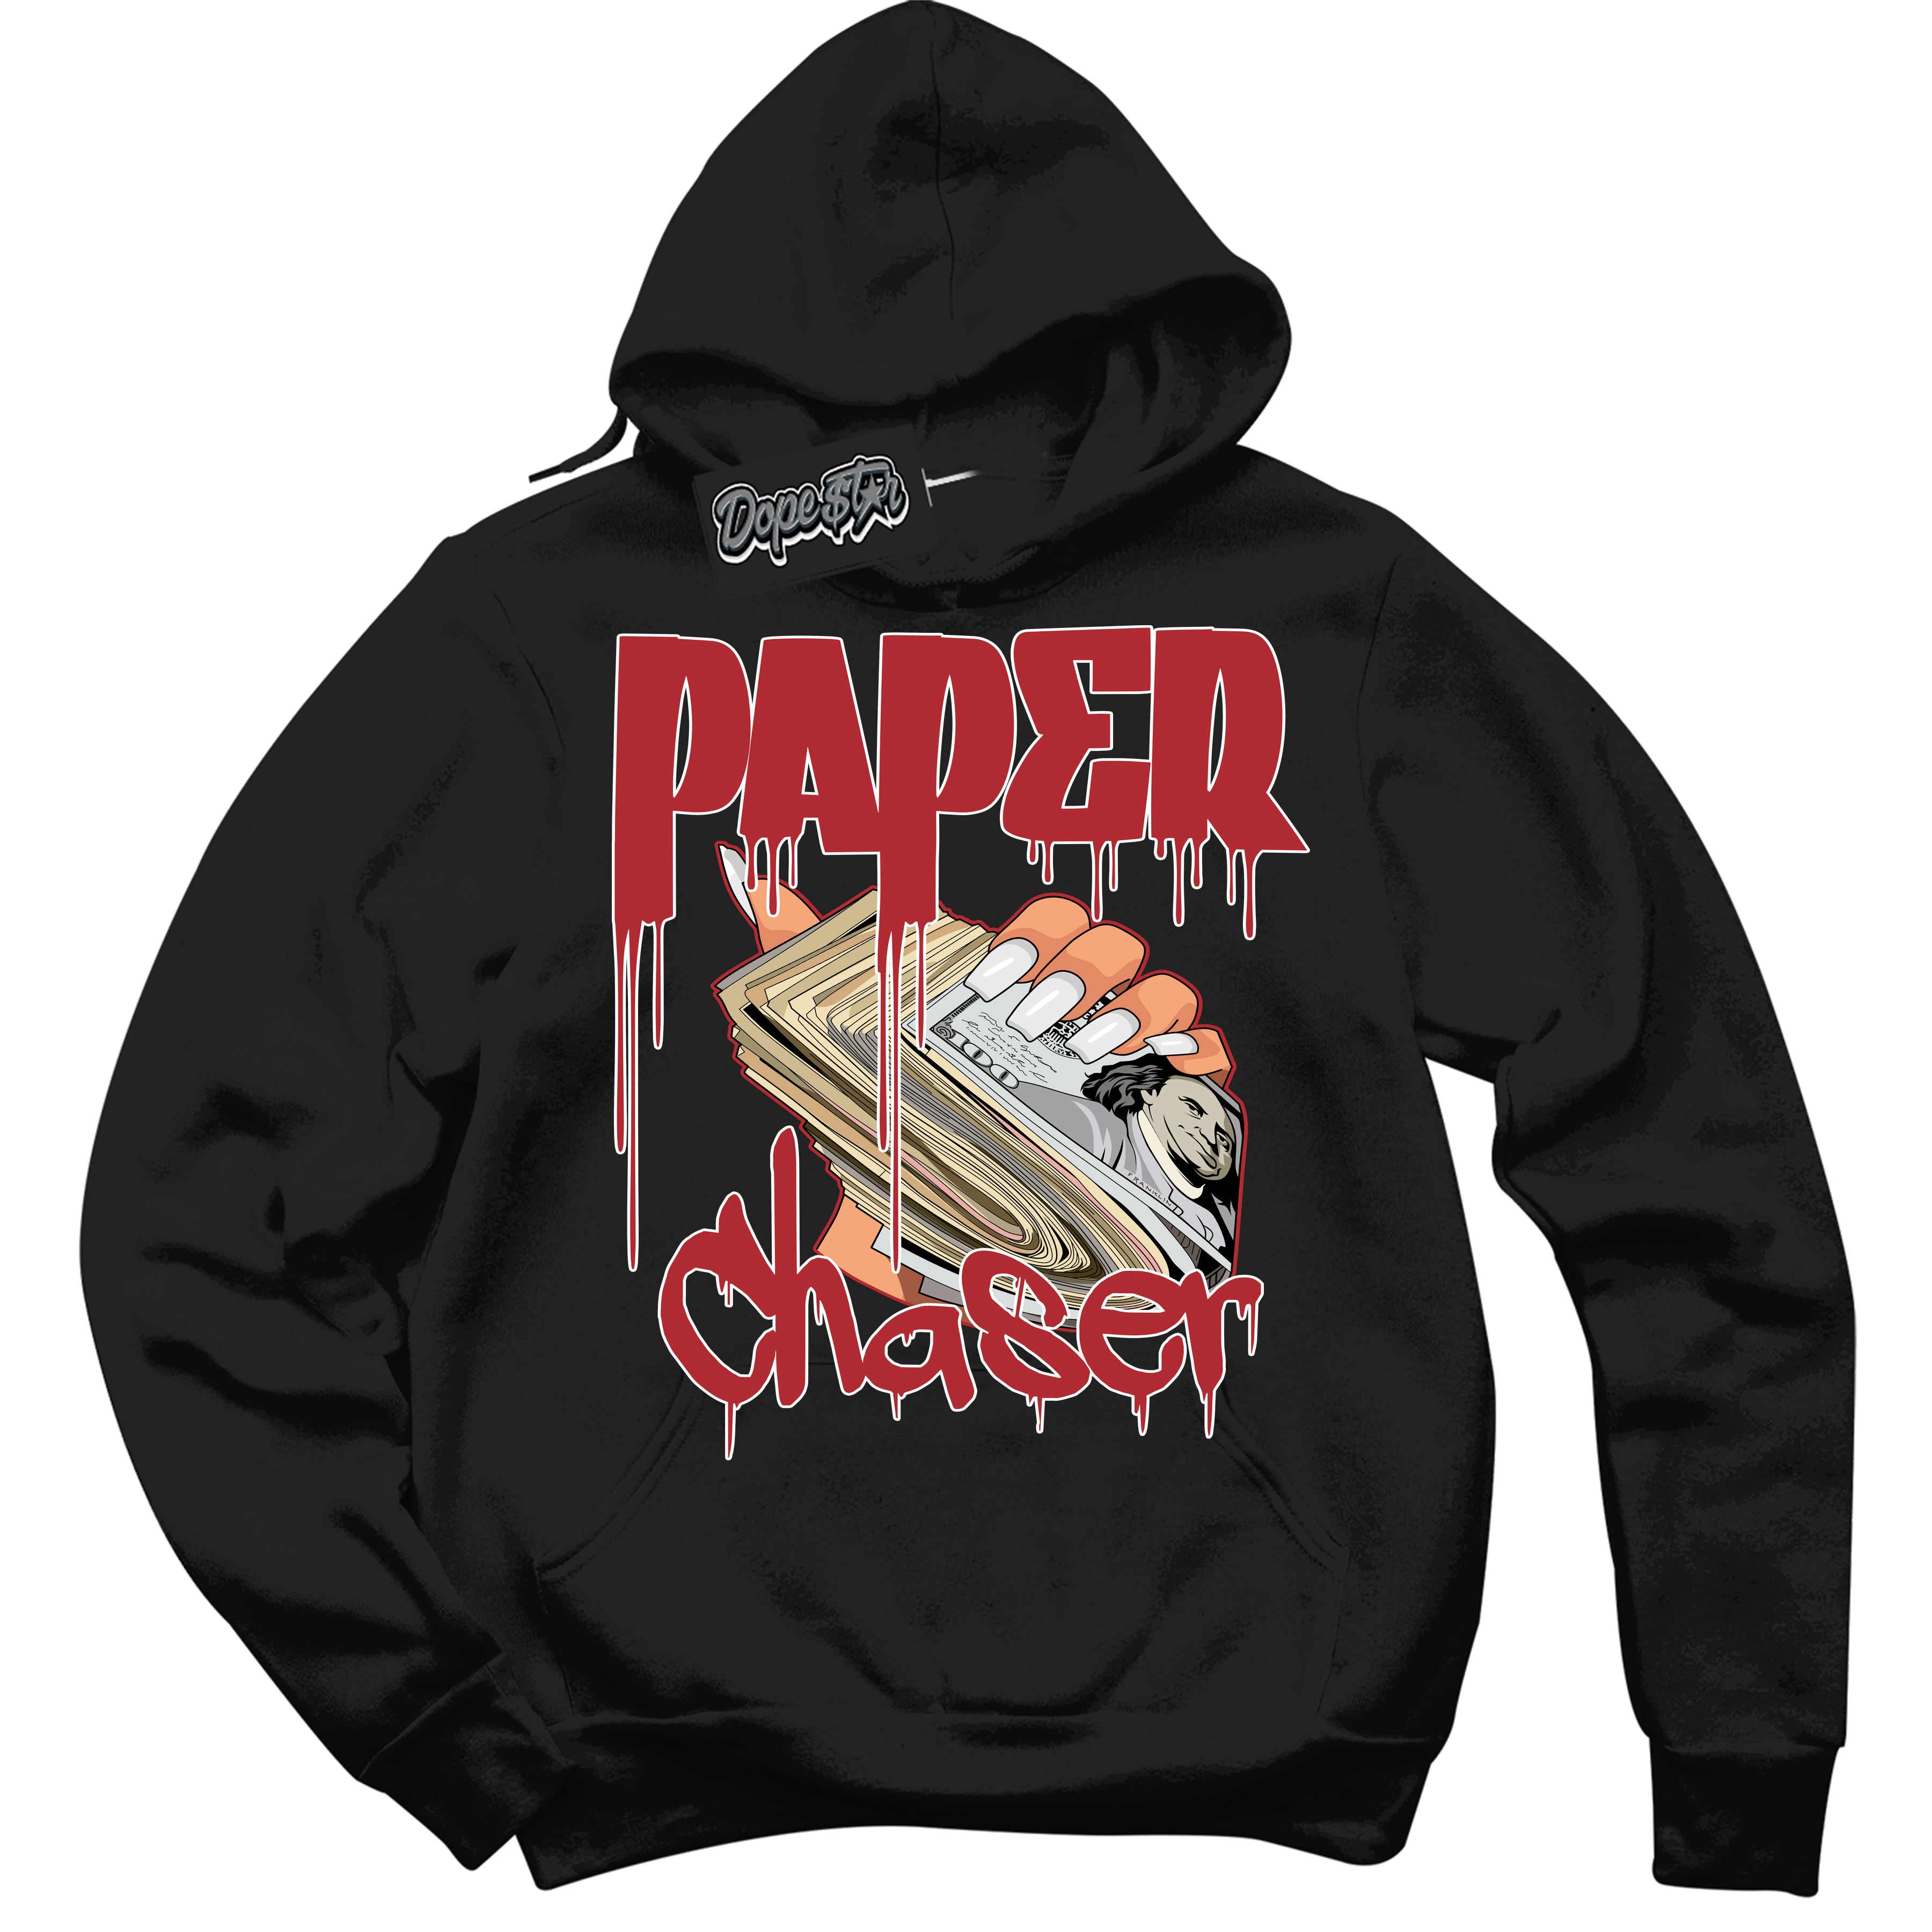 Cool Black Hoodie With “ Paper Chaser “ Design That Perfectly Matches Lost And Found 1s Sneakers